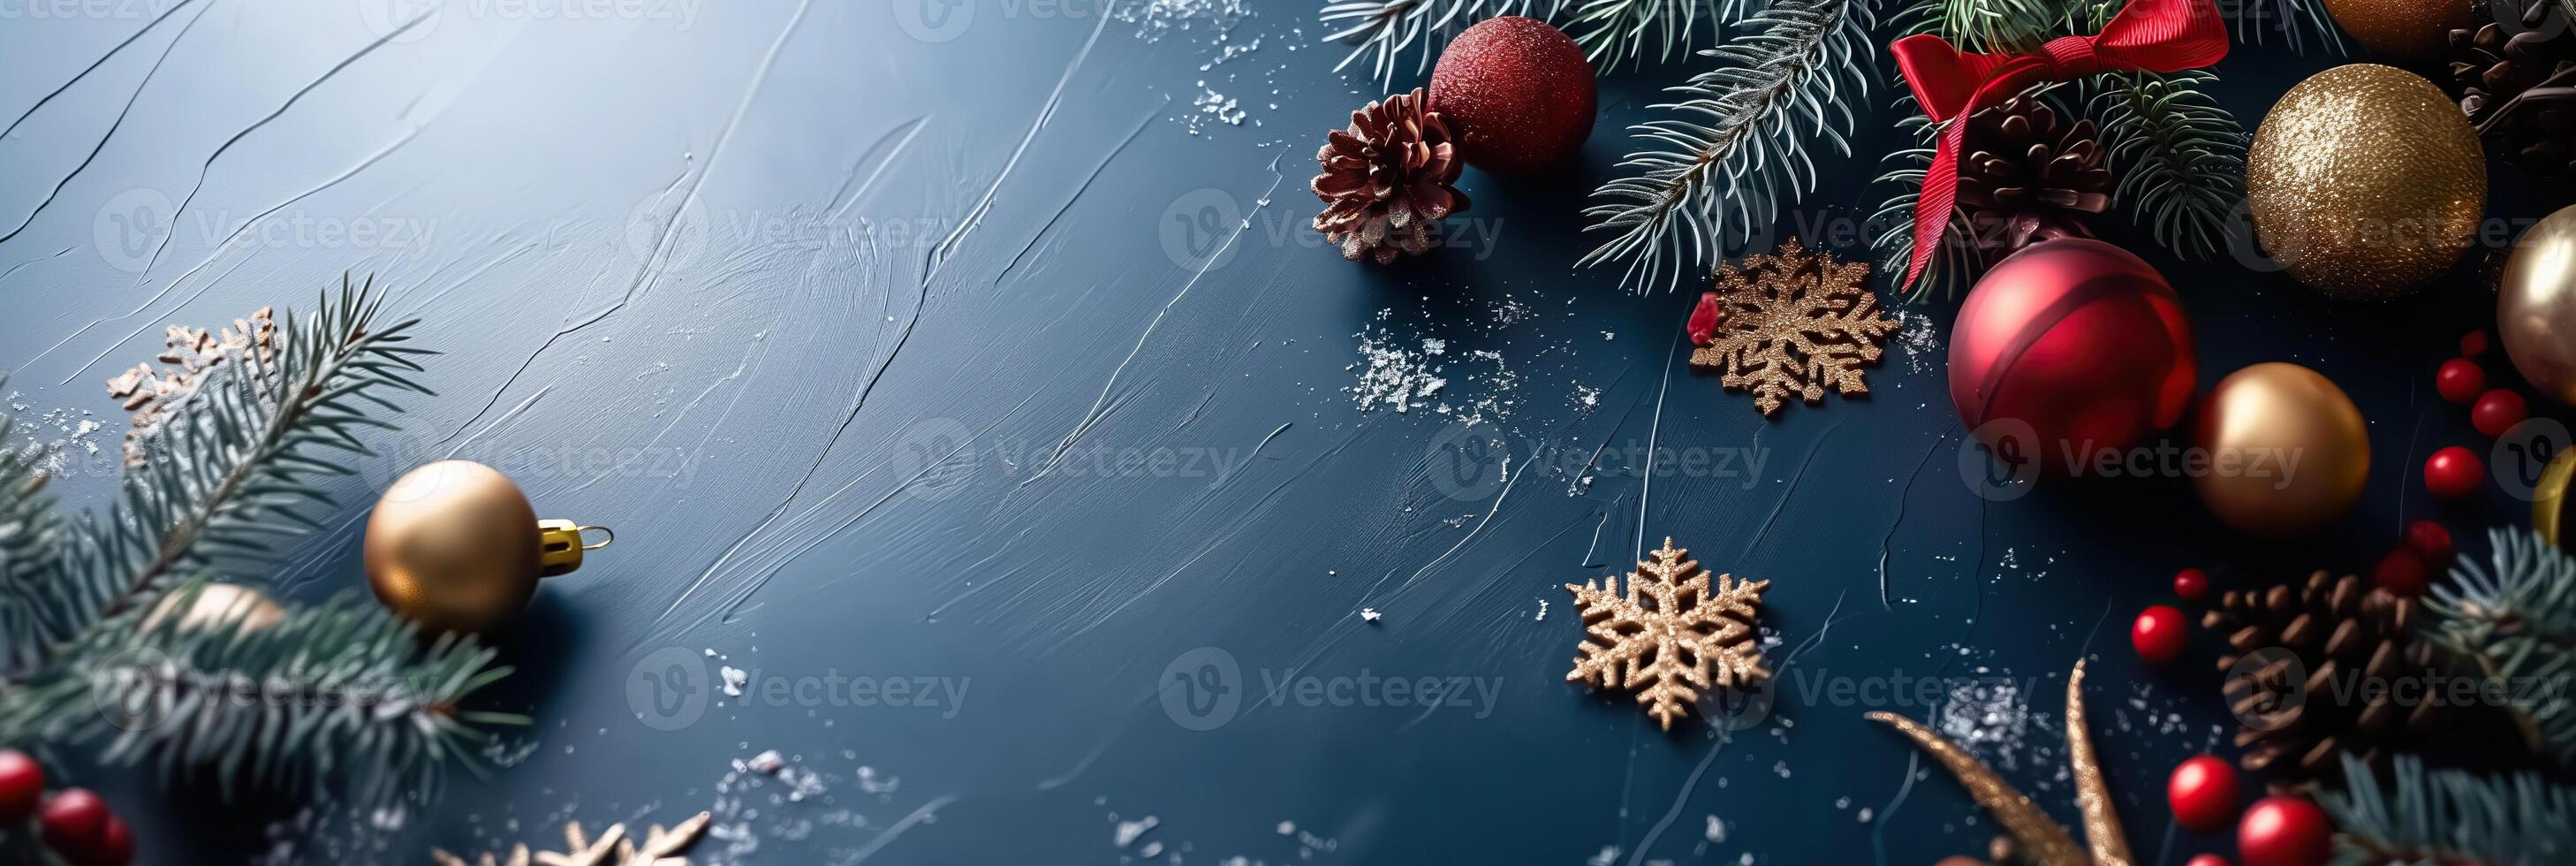 A blue background with a bunch of Christmas decorations including red photo